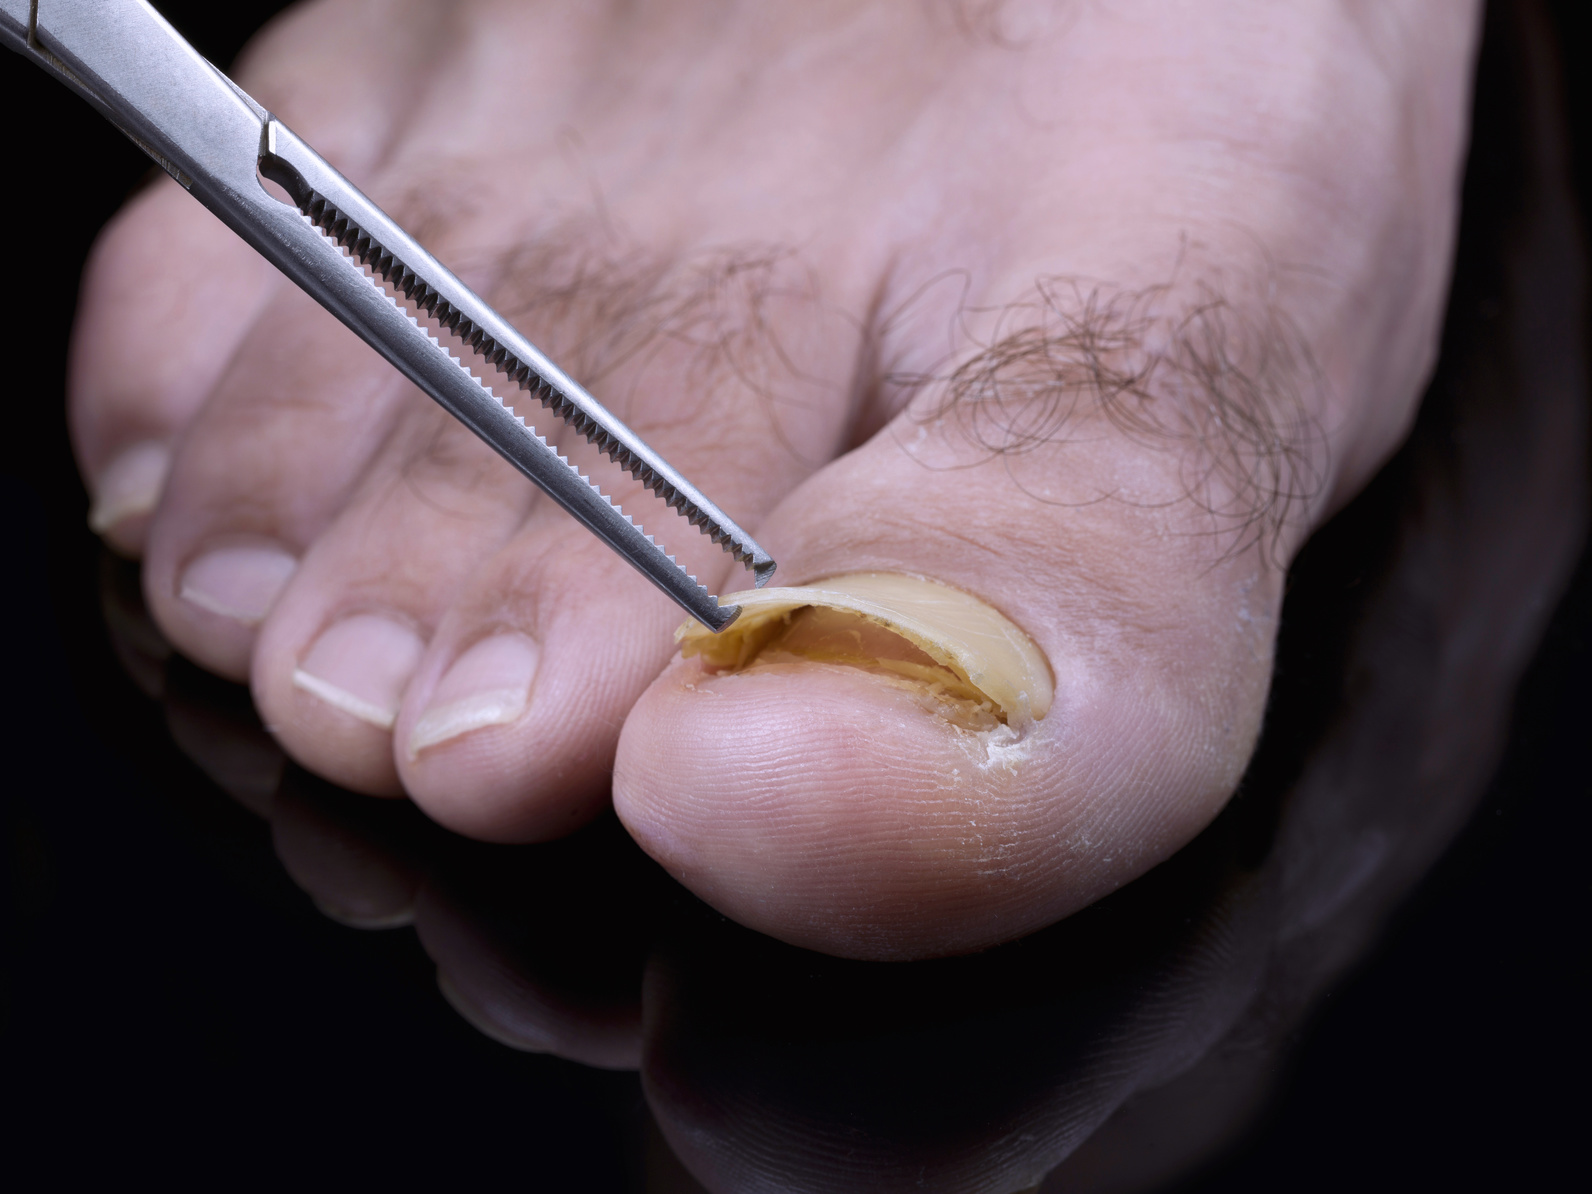 Toenail Fungus Pictures Toenail Fungus Pictures Of What It Looks Like Treatment Tips The